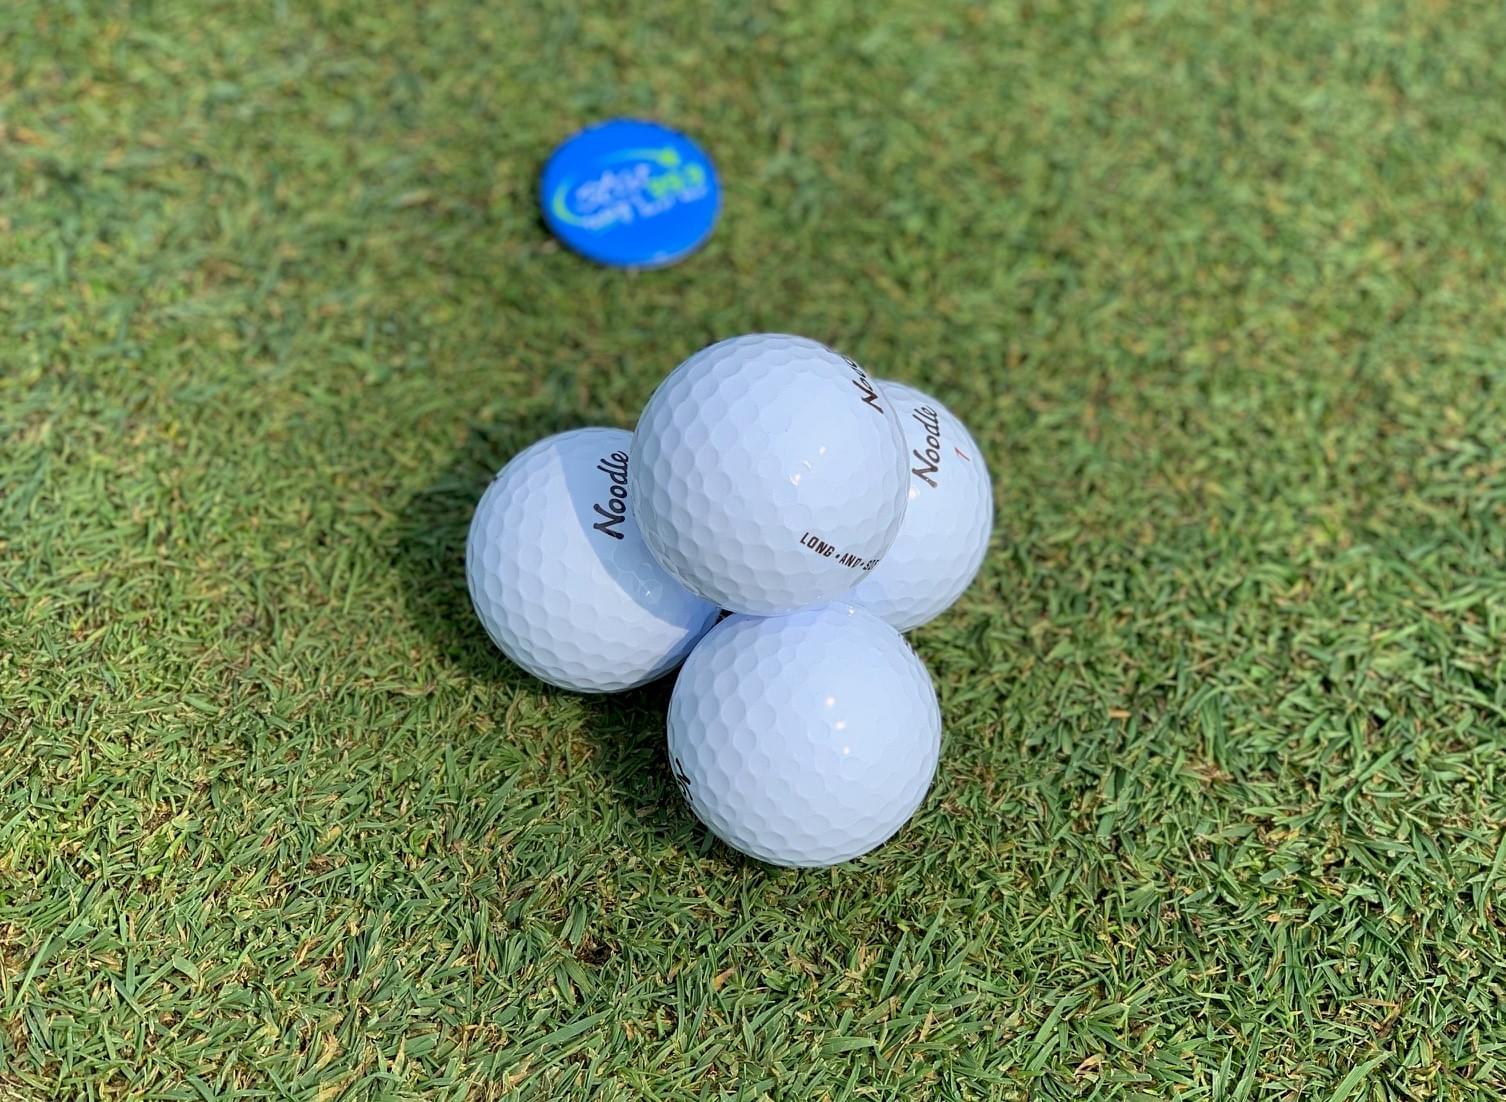 MUNDANE MYSTERIES: Why do golf balls have dimples in them?